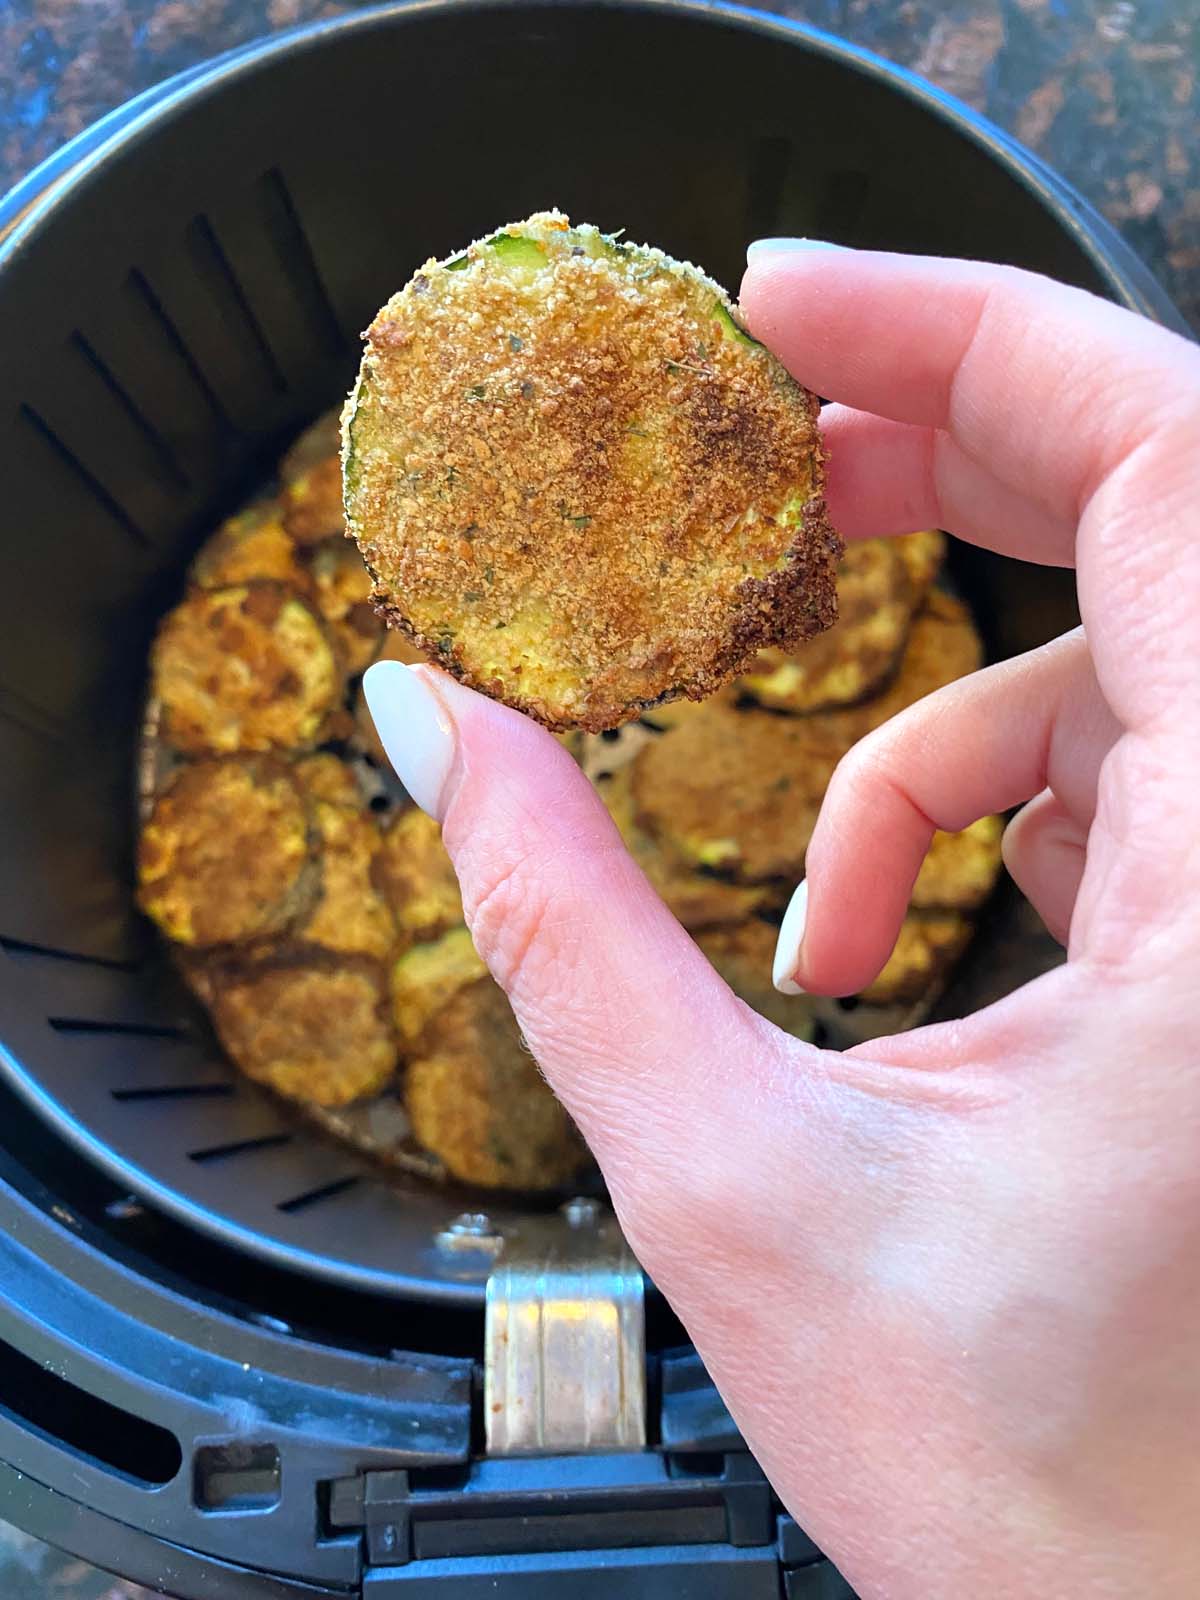 Cooked breaded zucchini in an air fryer with one piece being held up by hand.